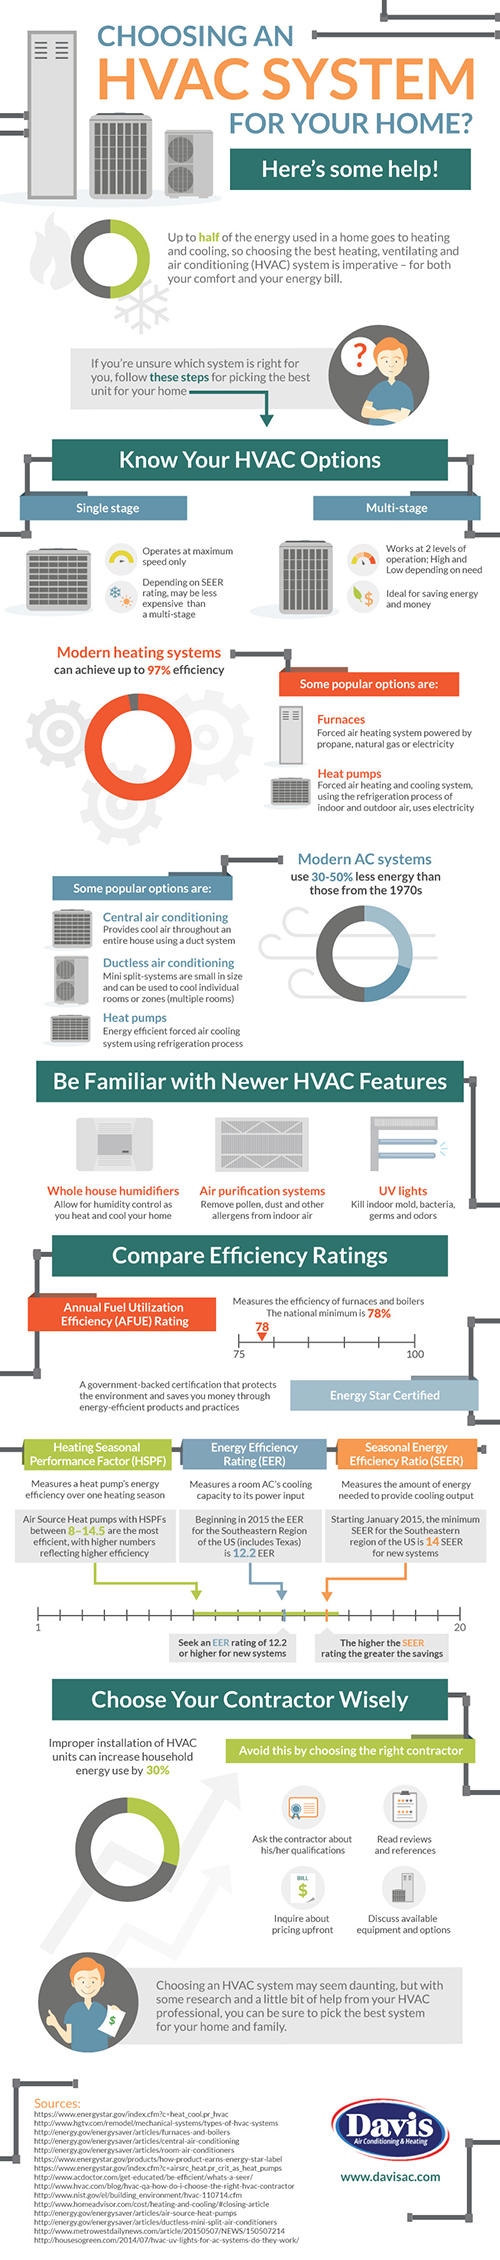 Choose-the-Right-HVAC-System-for-Your-Home Info-Graphic